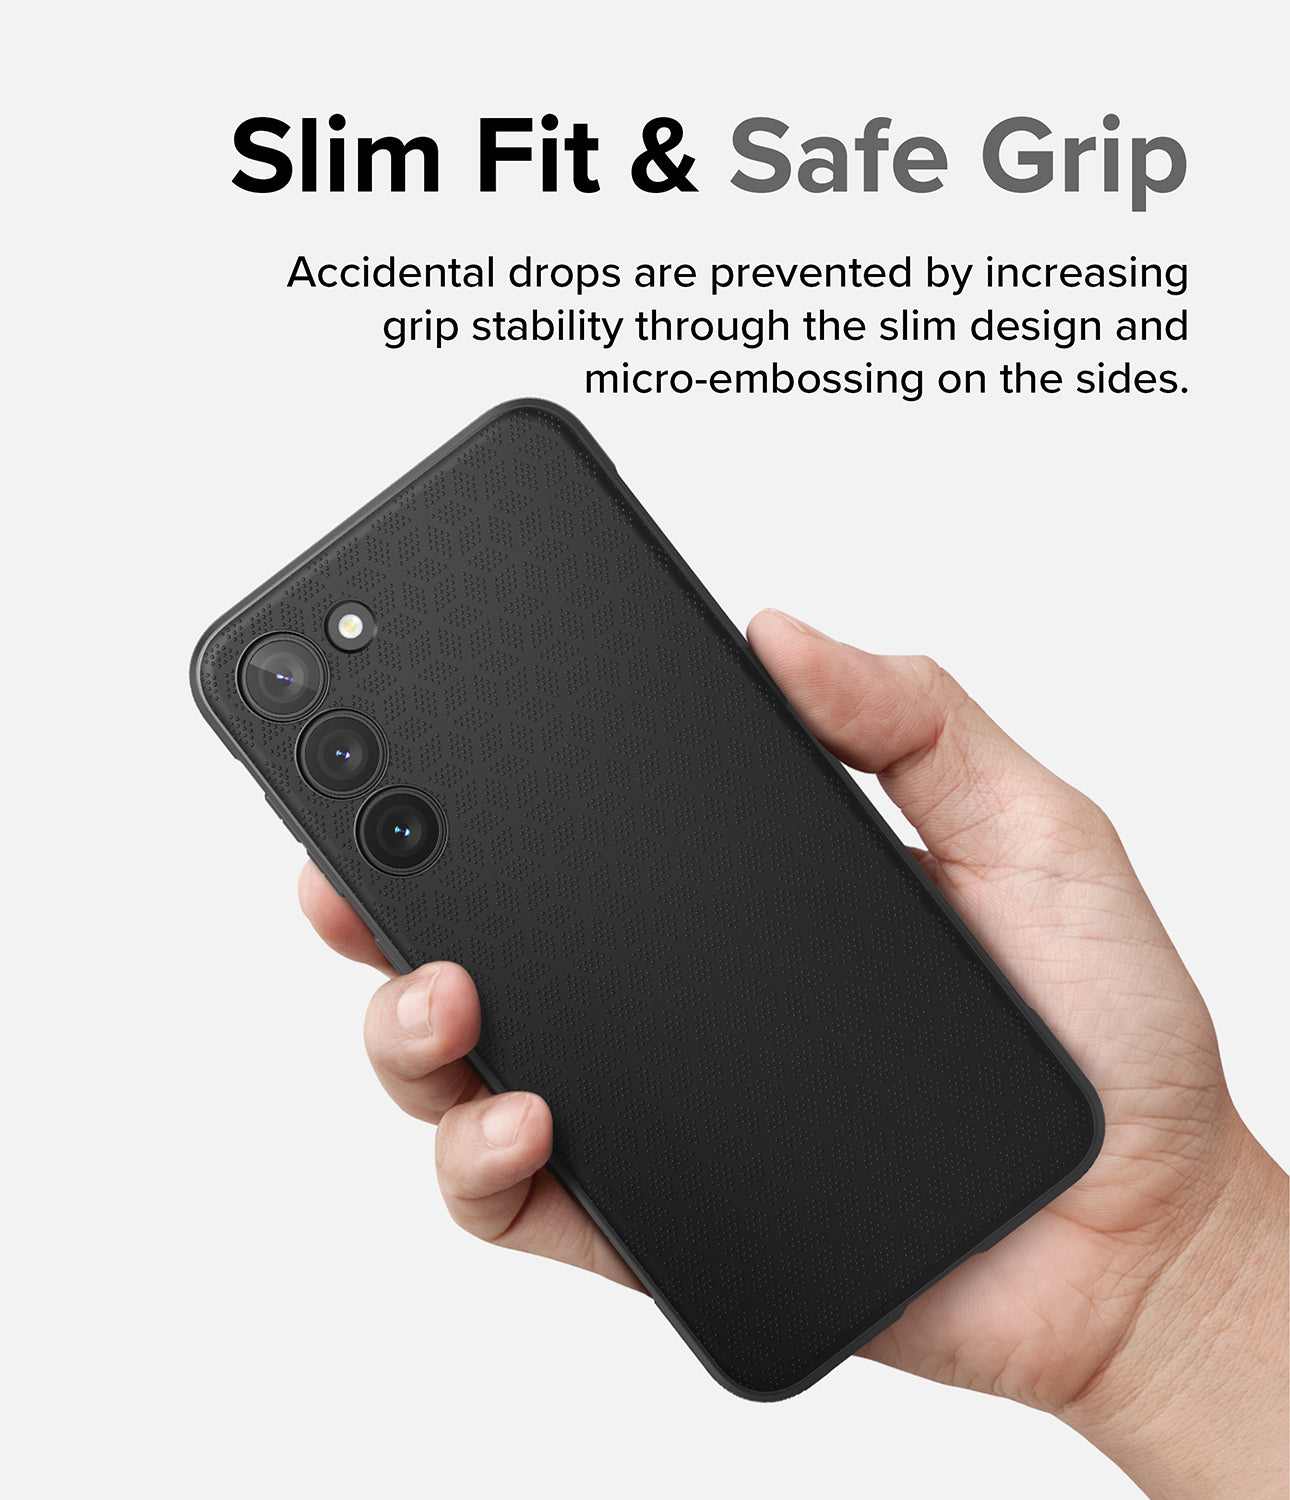 Galaxy S23 Plus Case | Onyx Black - Slim Fit and Safe Grip. Accidental drops are prevented by increasing grip stability through the slim design and micro-embossing on the sides.